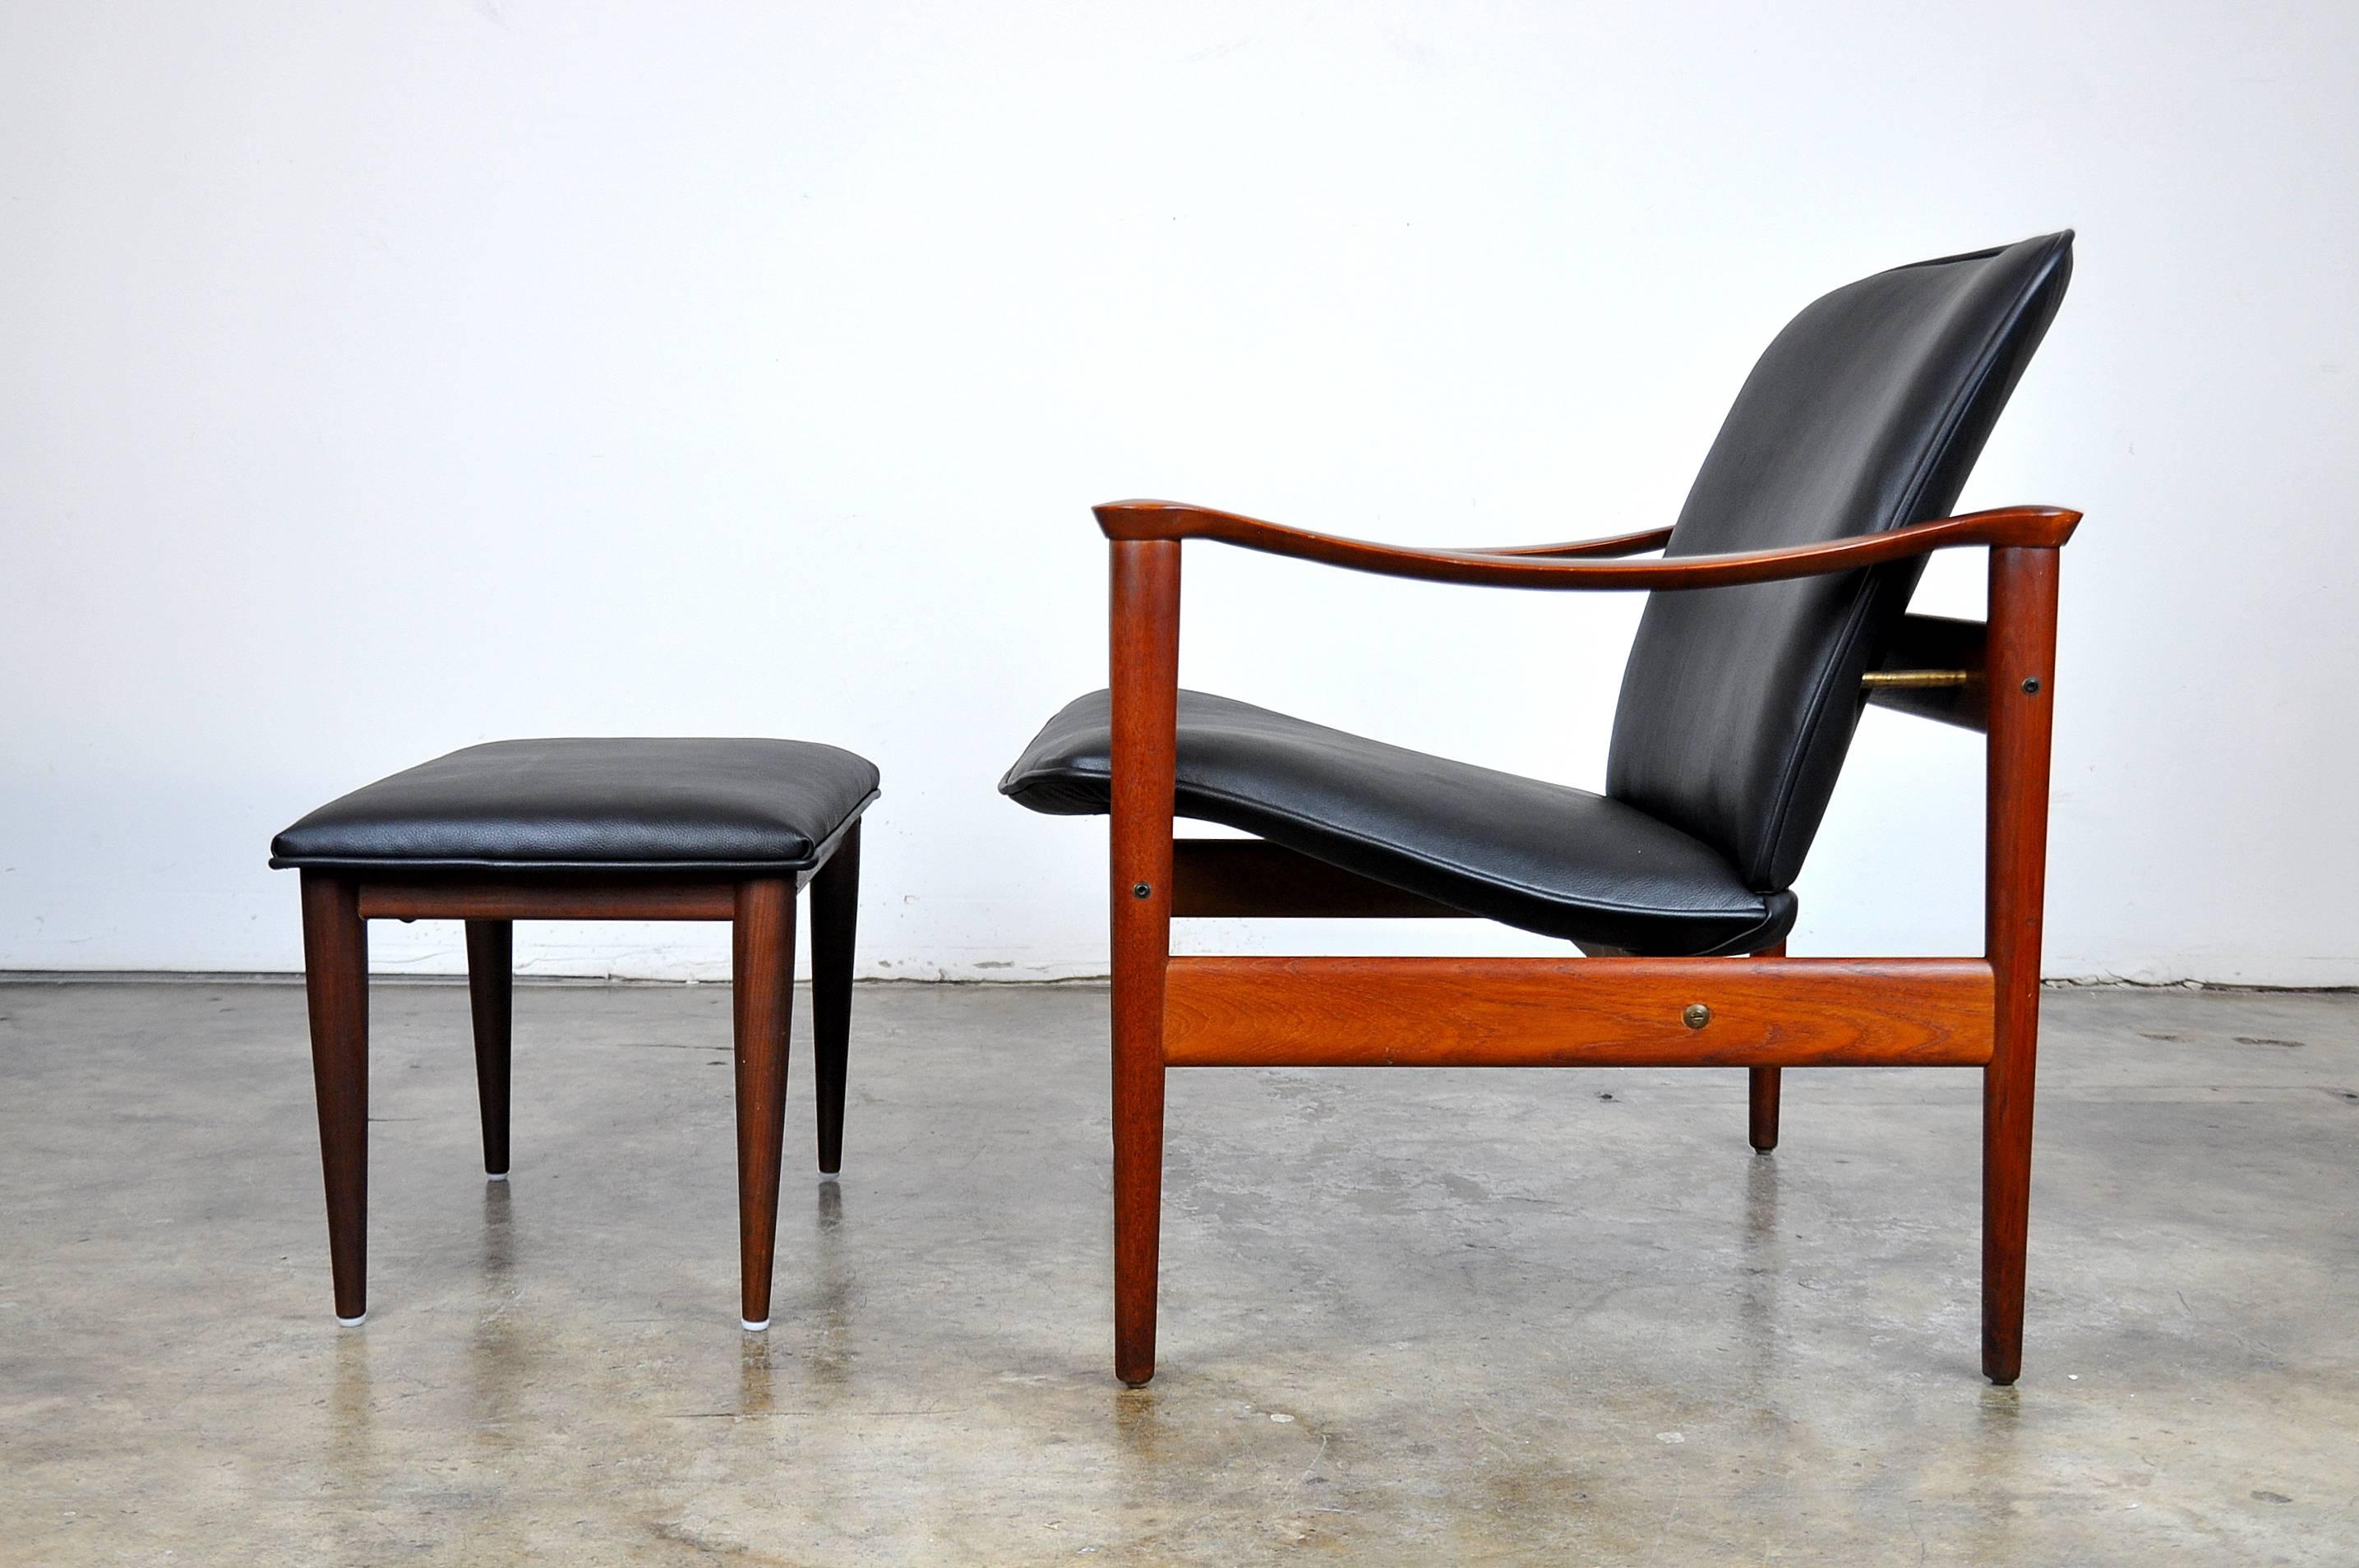 A beautiful estate fresh example of the Mid-Century Scandinavian Modern model 711 easy chair designed by Fredrik Kayser and manufactured by Vatne Møbler in Norway. Much like Finn Juhl's chairs, the Modell 711 Chair's brilliant design features a seat